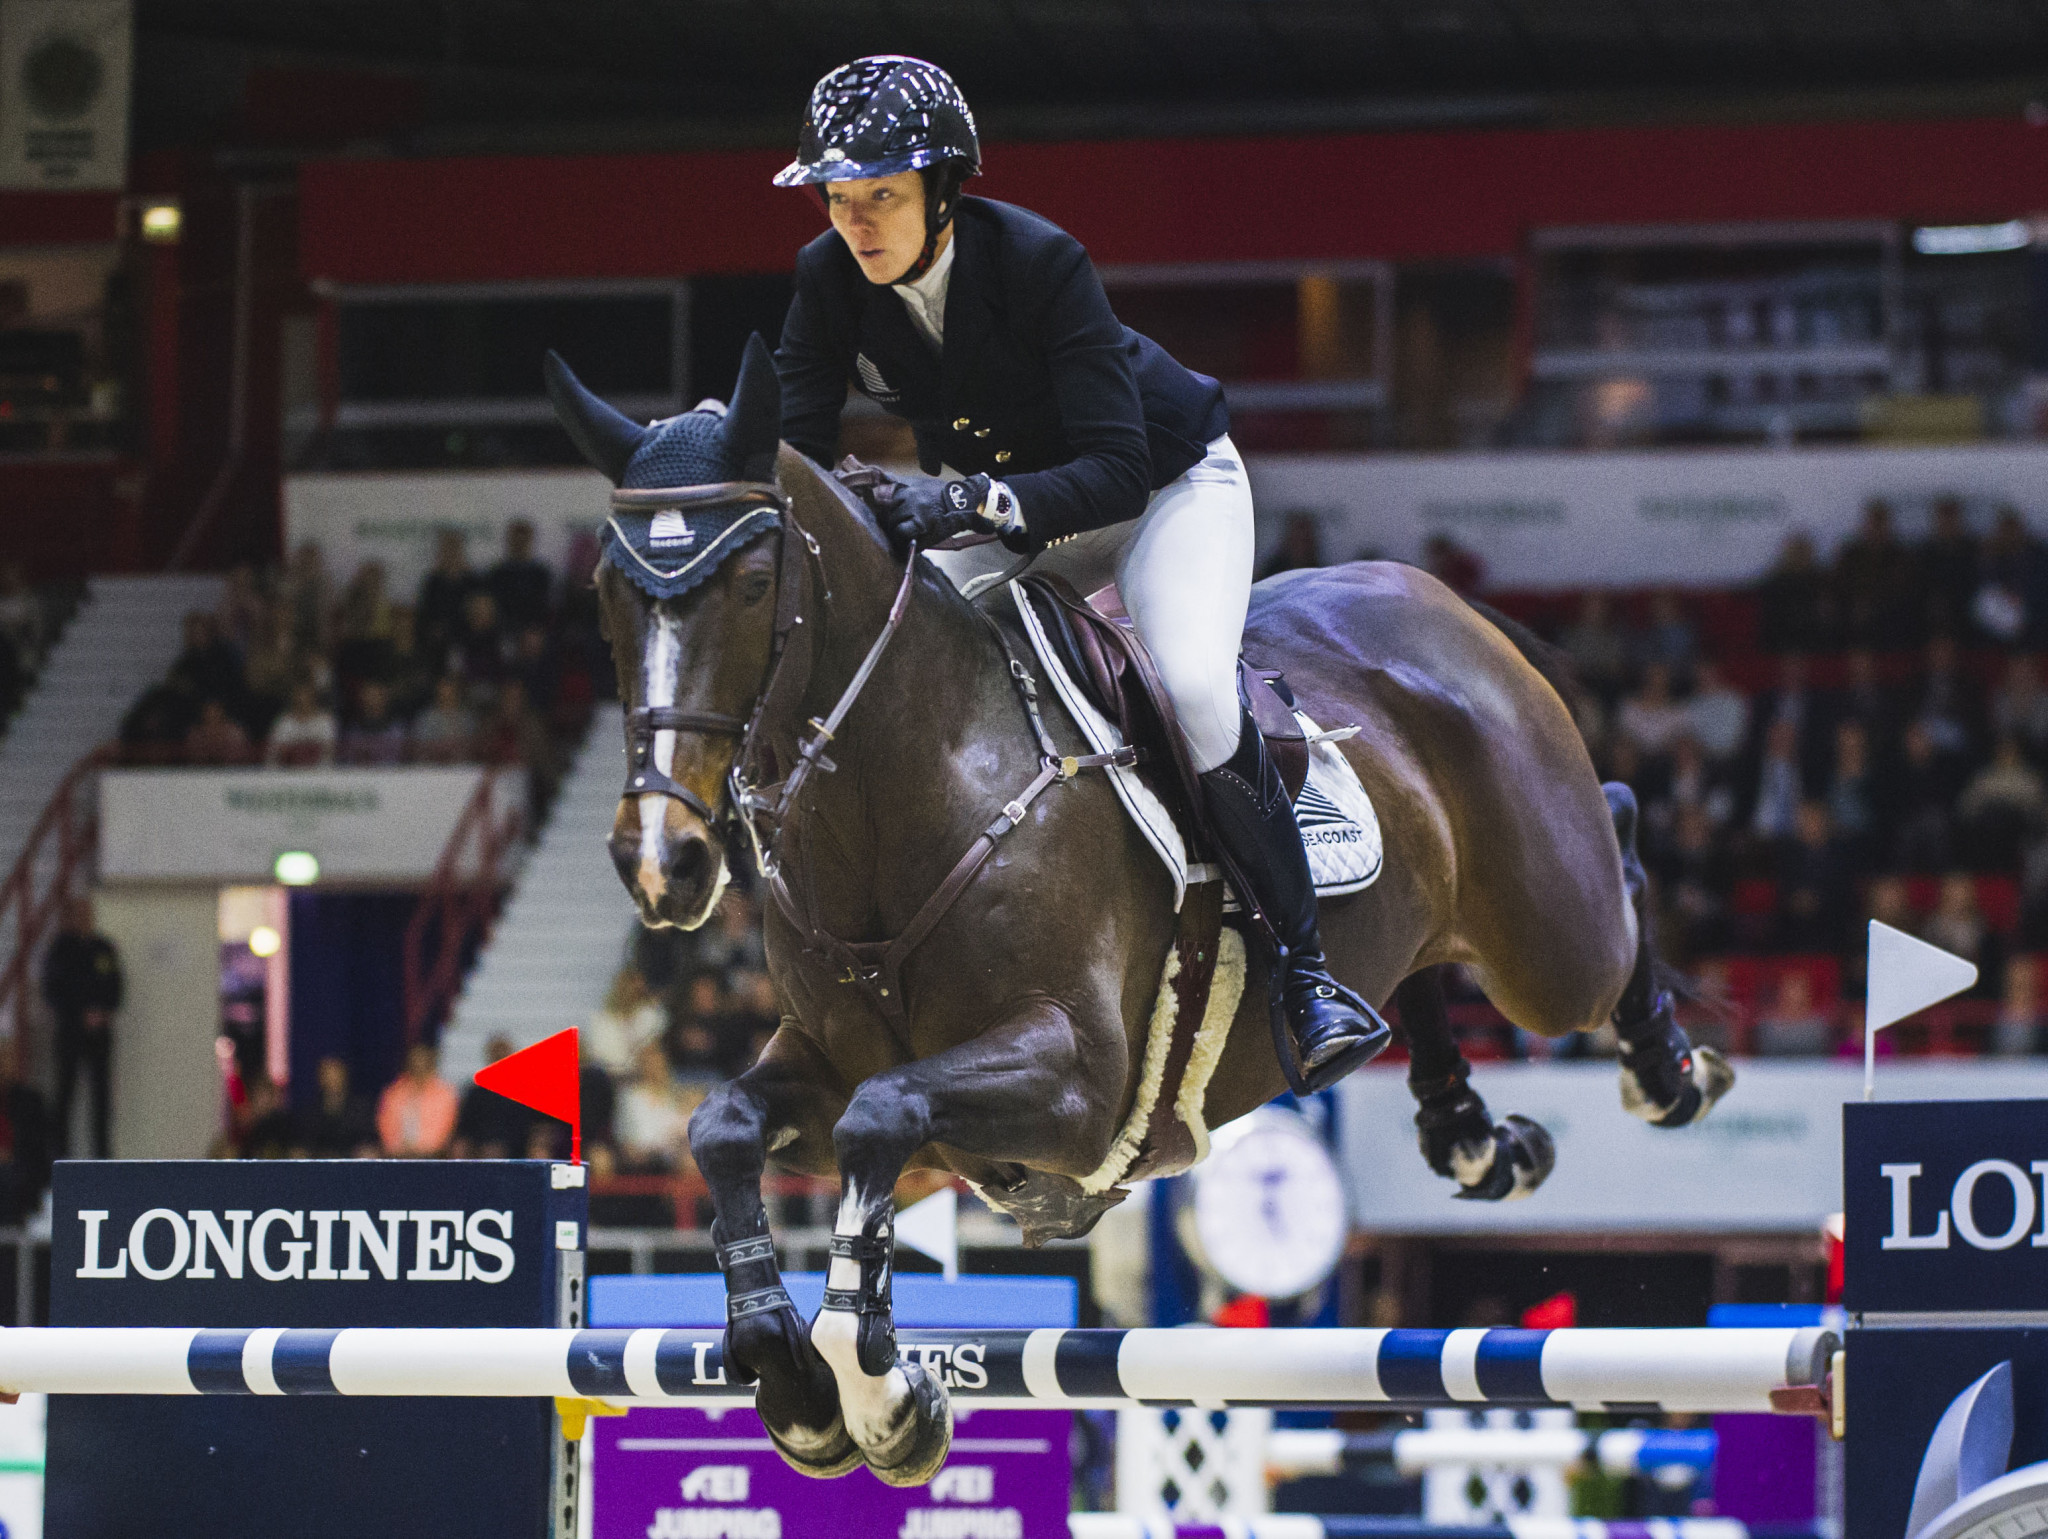 Patteet wins second FEI World Cup Western League event after 10 horse jump off